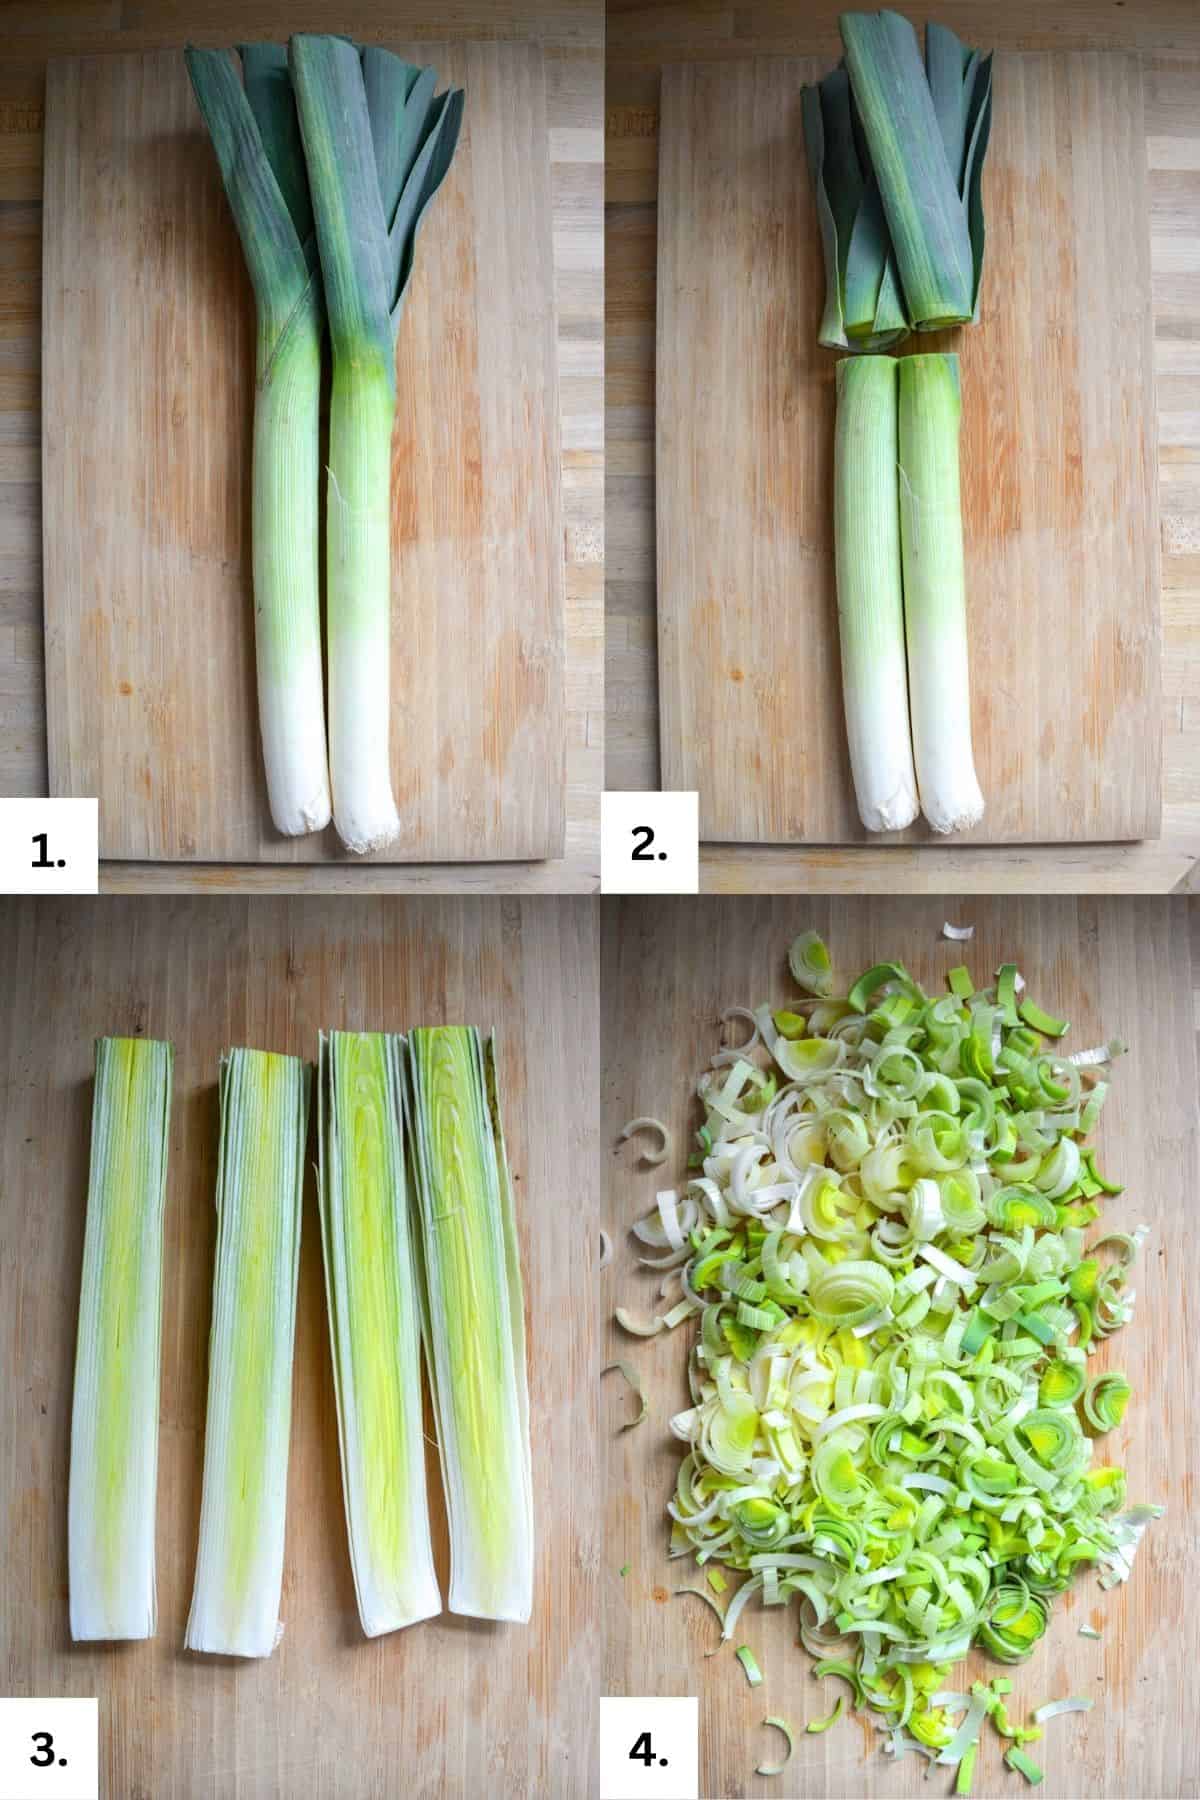 Steps of how to cut leeks. From slicing down the middle to slicing into strips.